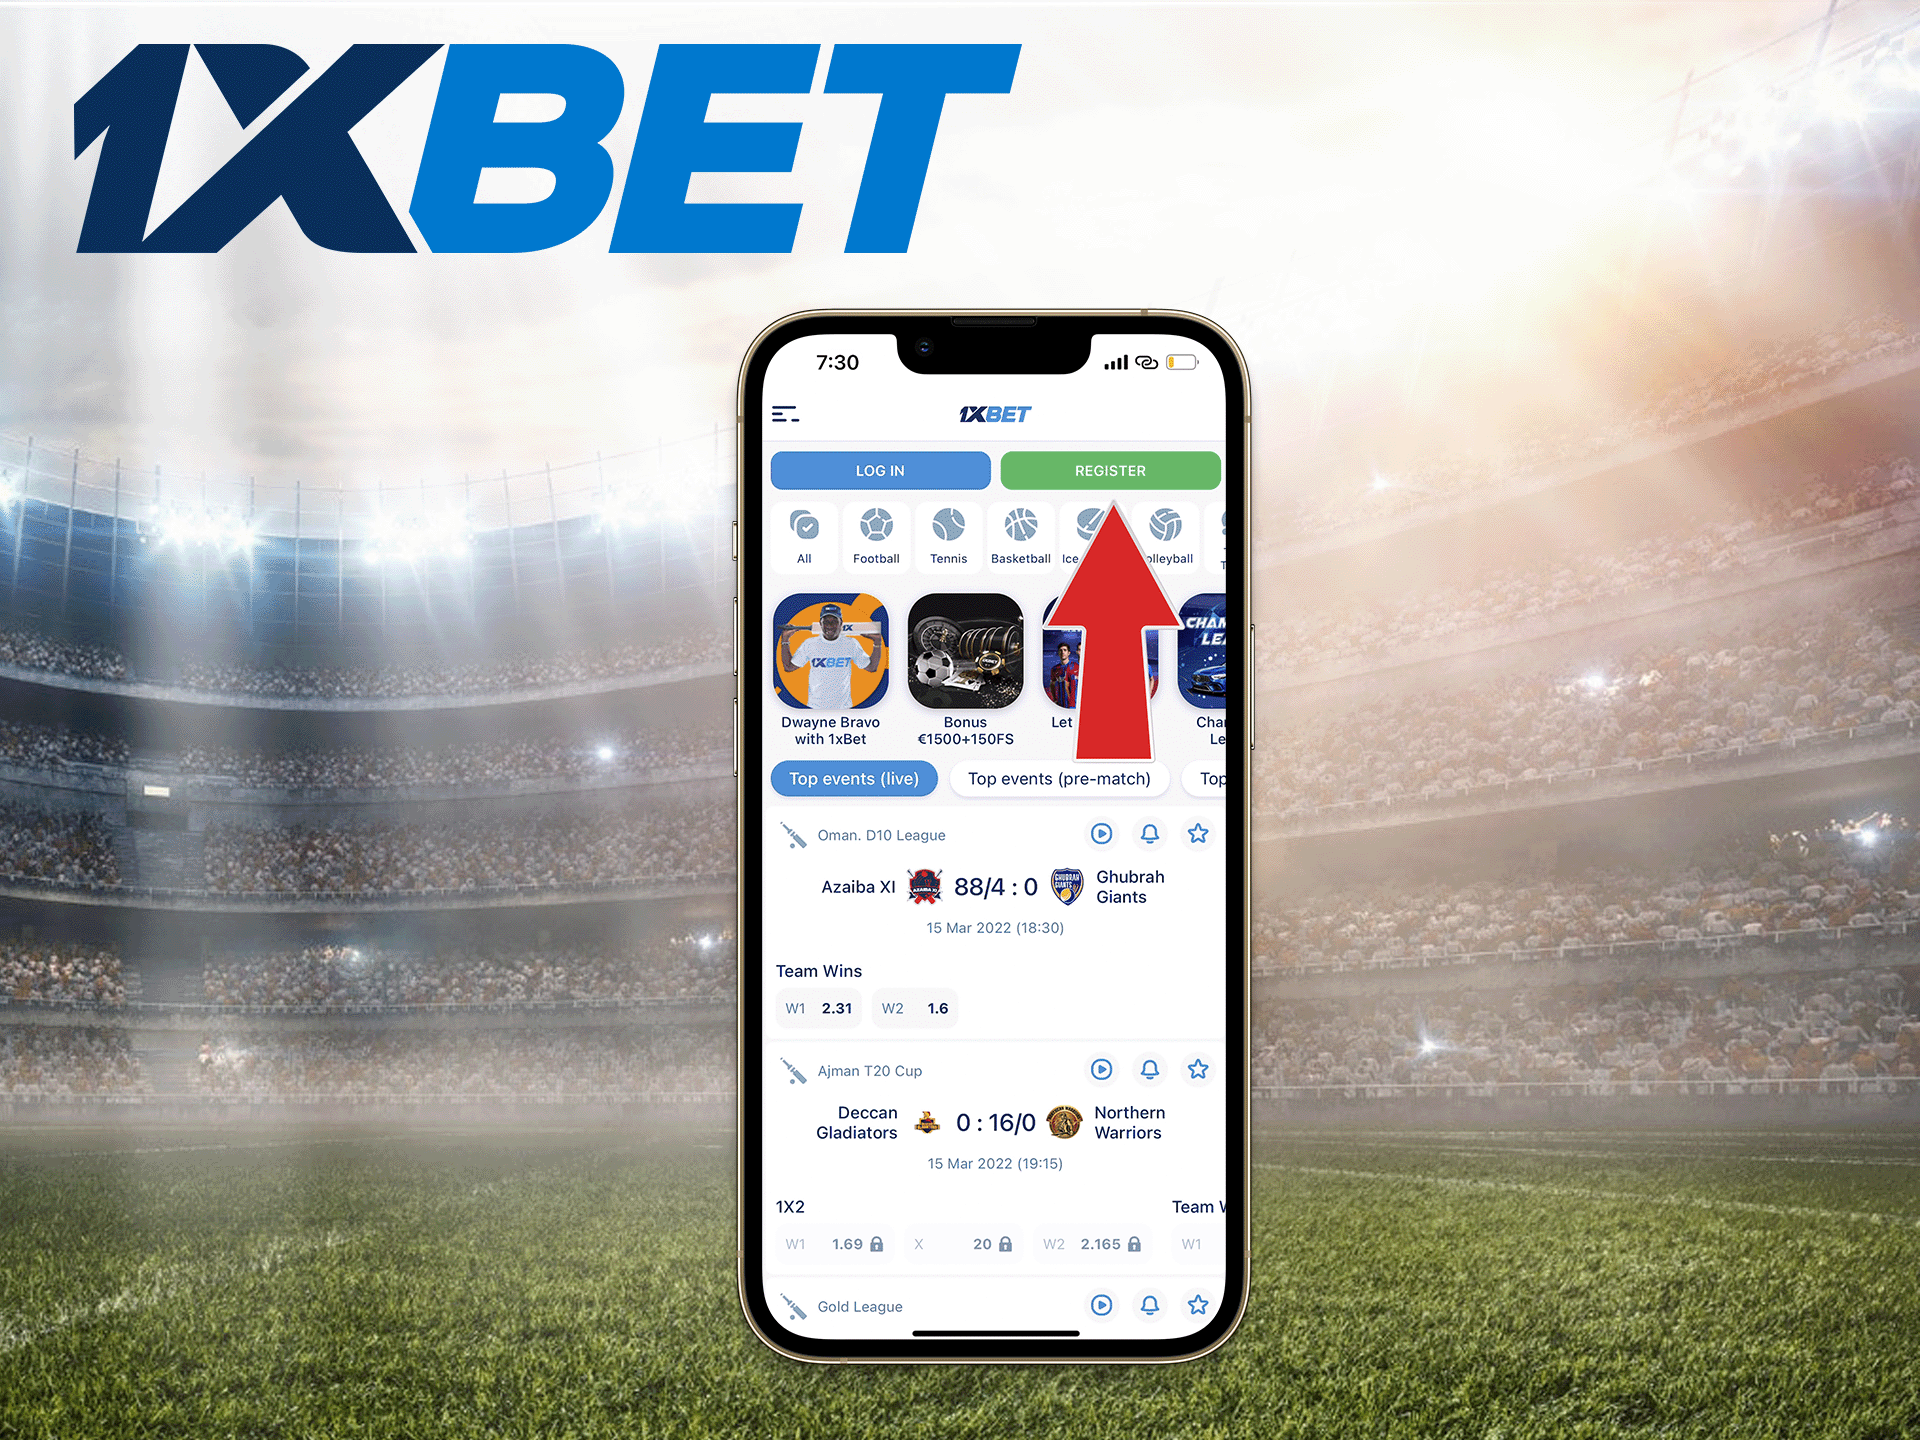 Instructions for creInstructions for creating account in 1xbet.